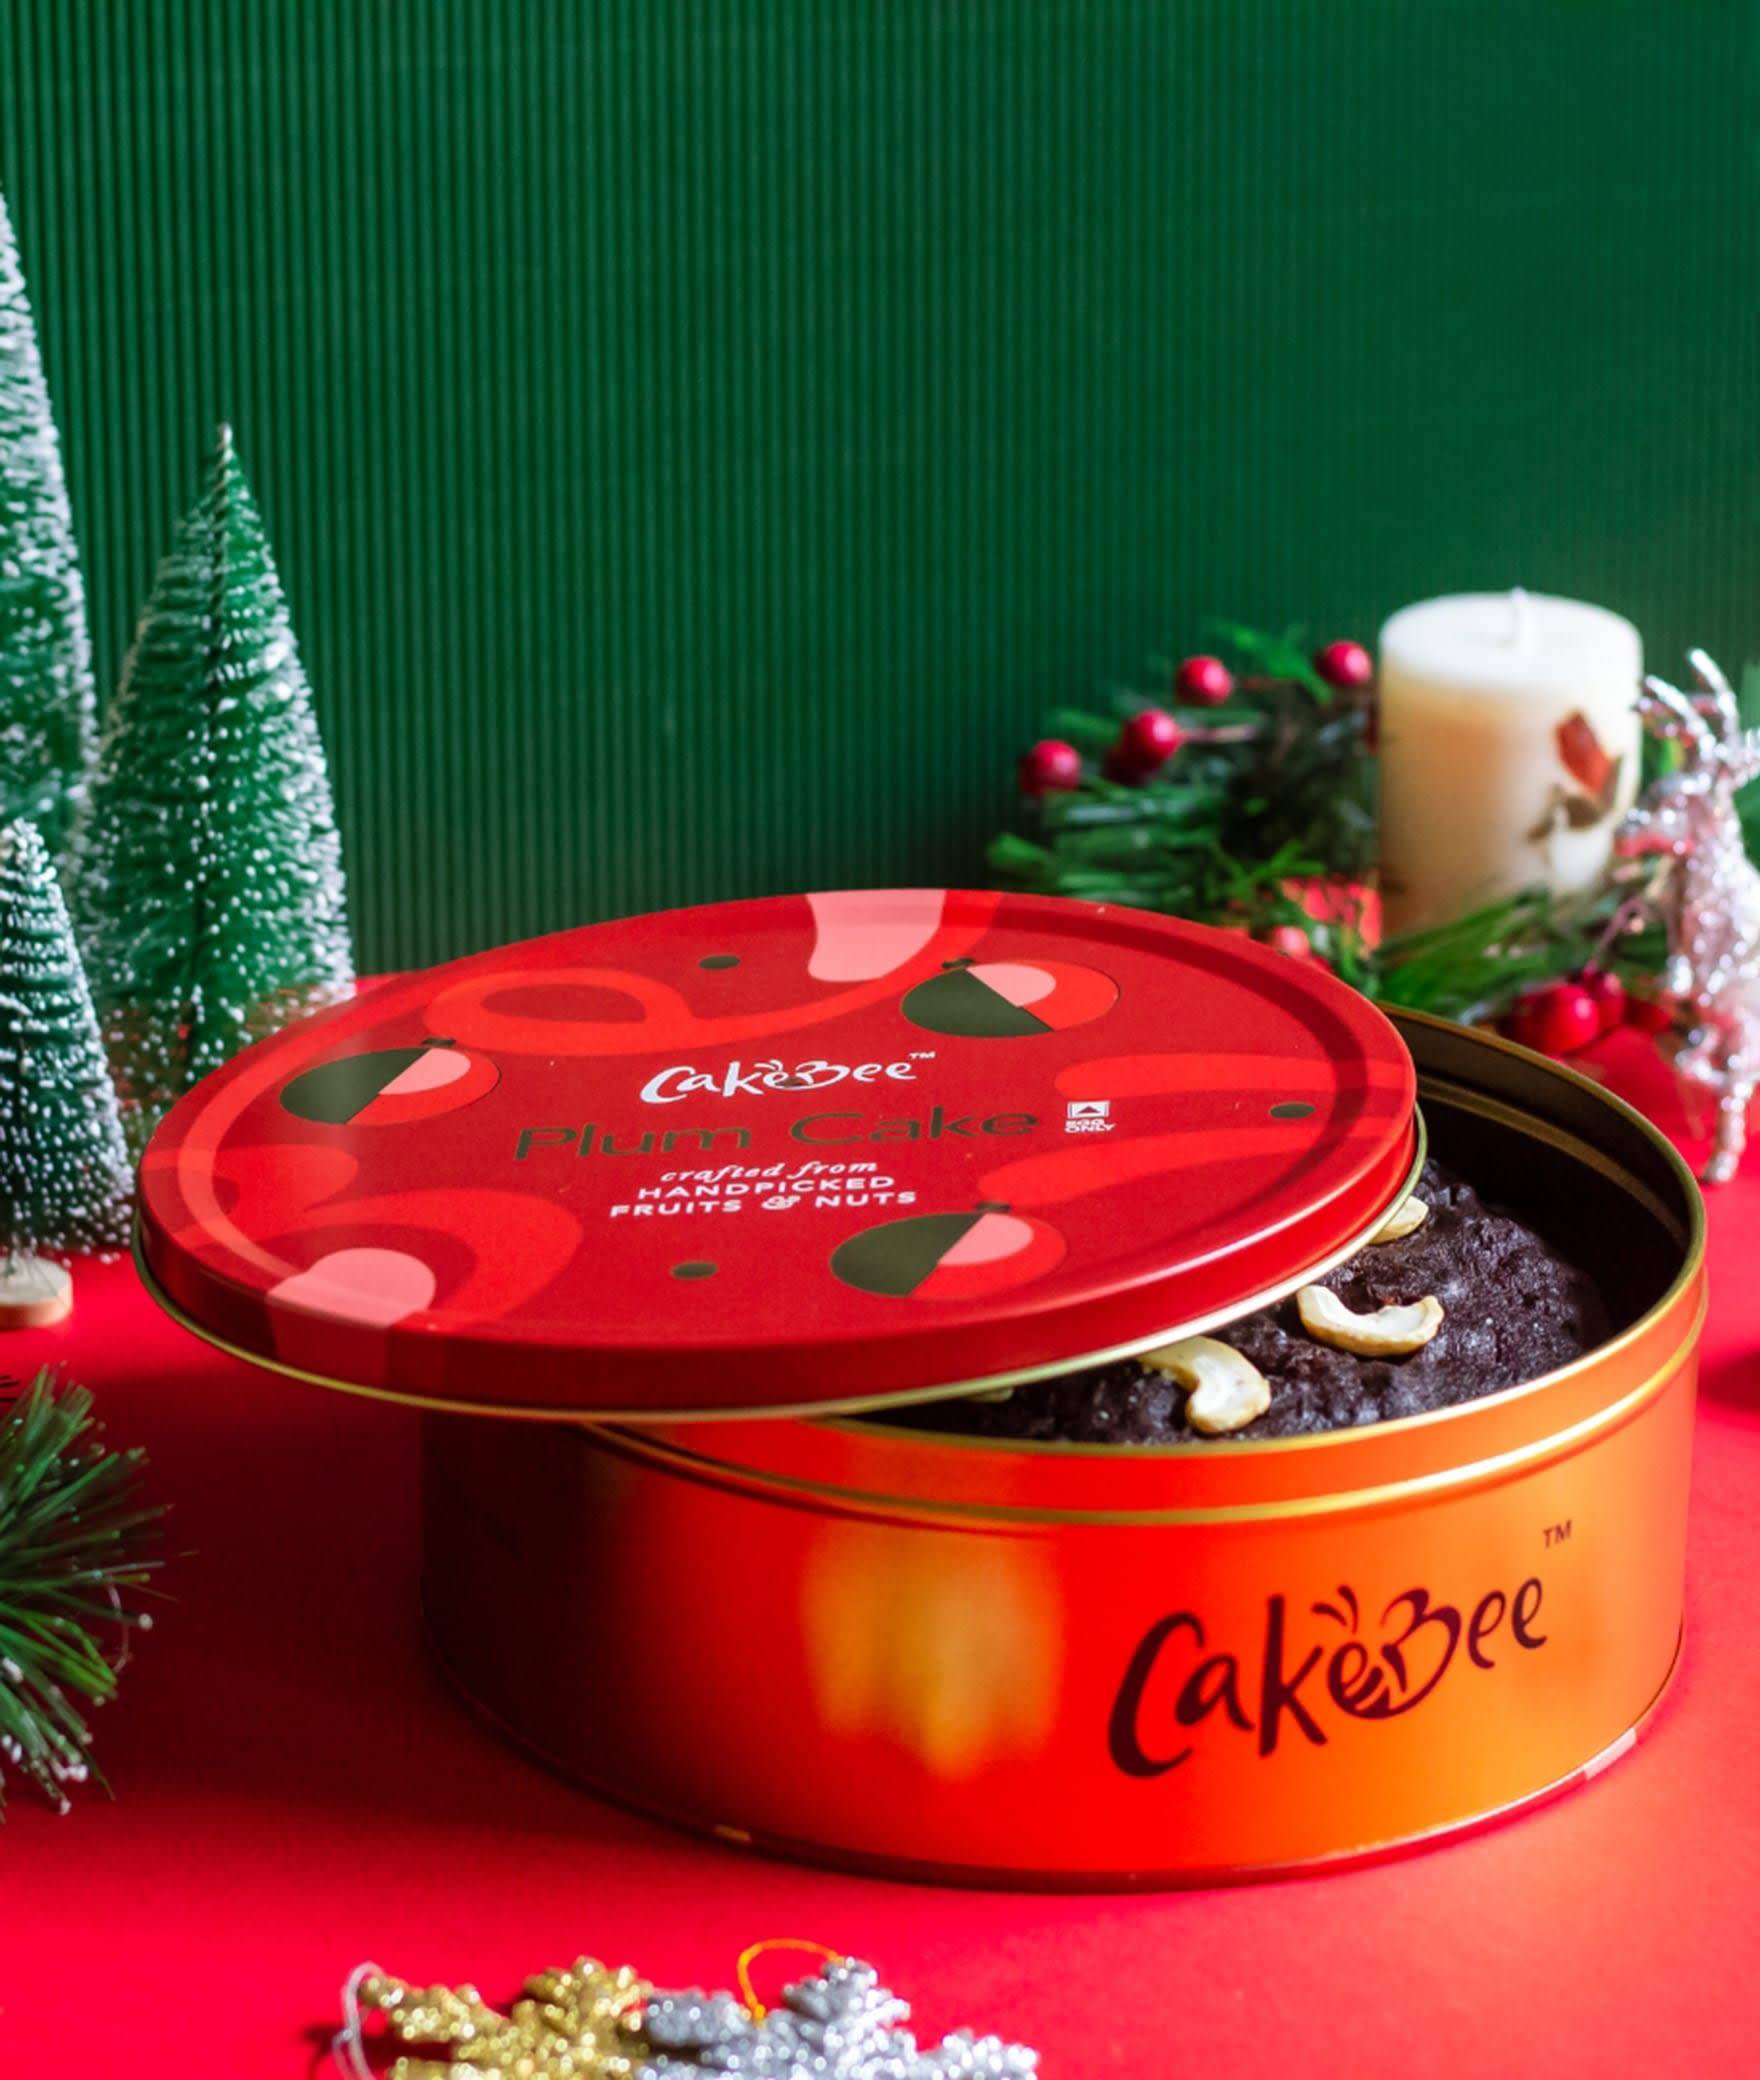 Christmas Gift Box at Rs 55/piece, Coimbatore